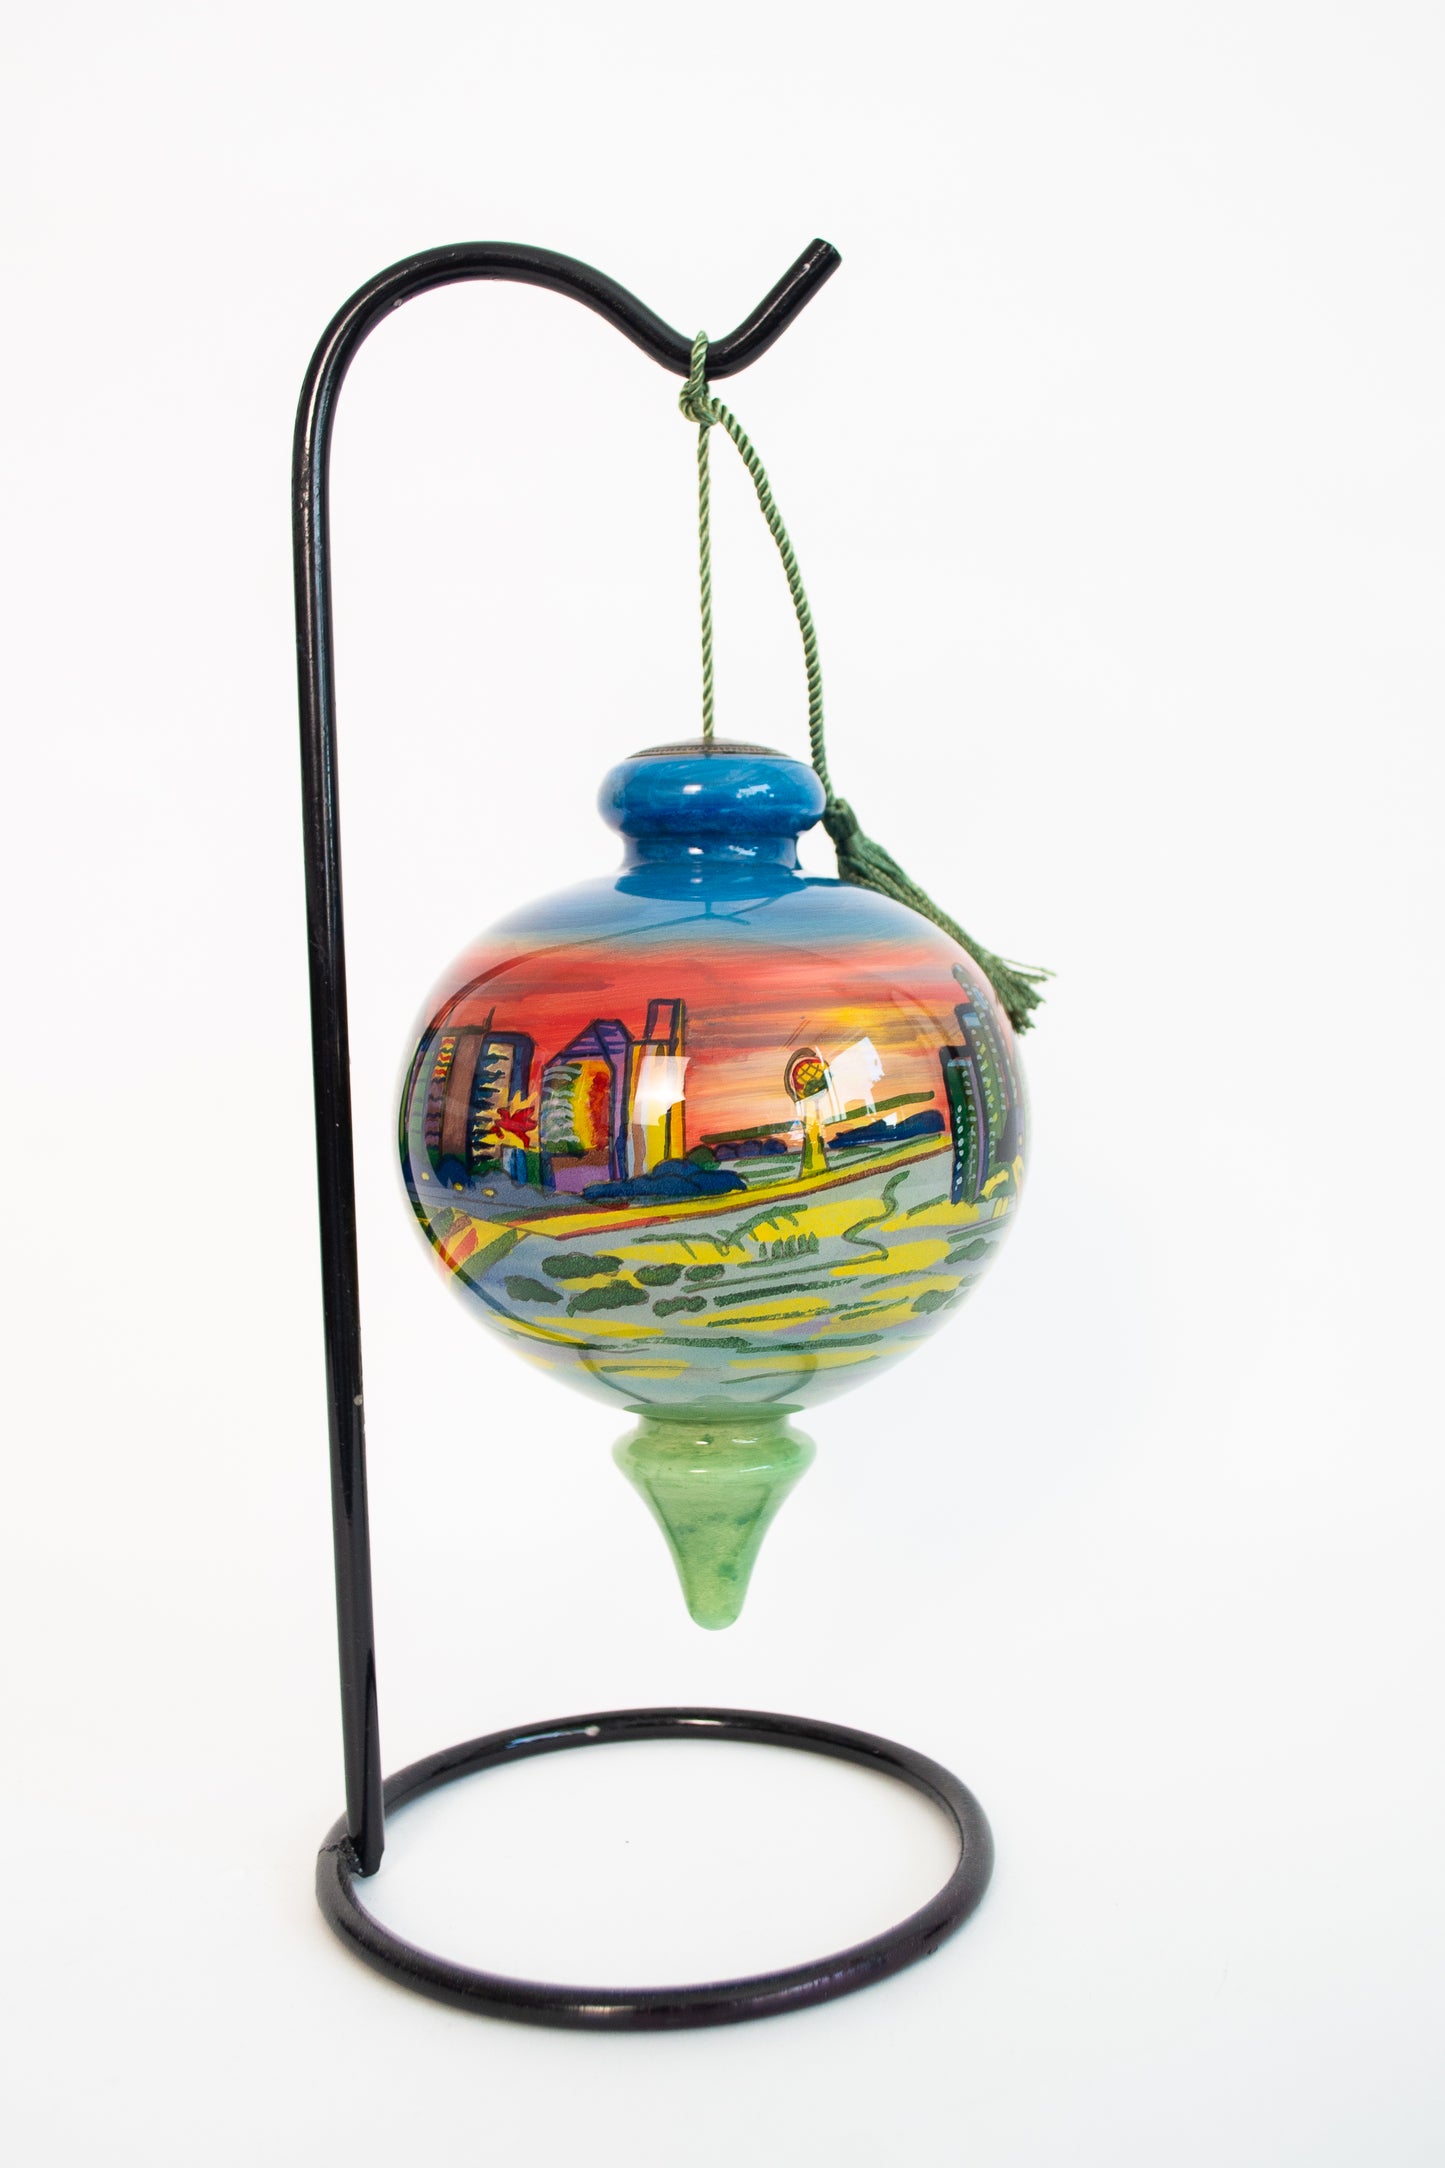 Hand-painted collectable ornaments - set of 2